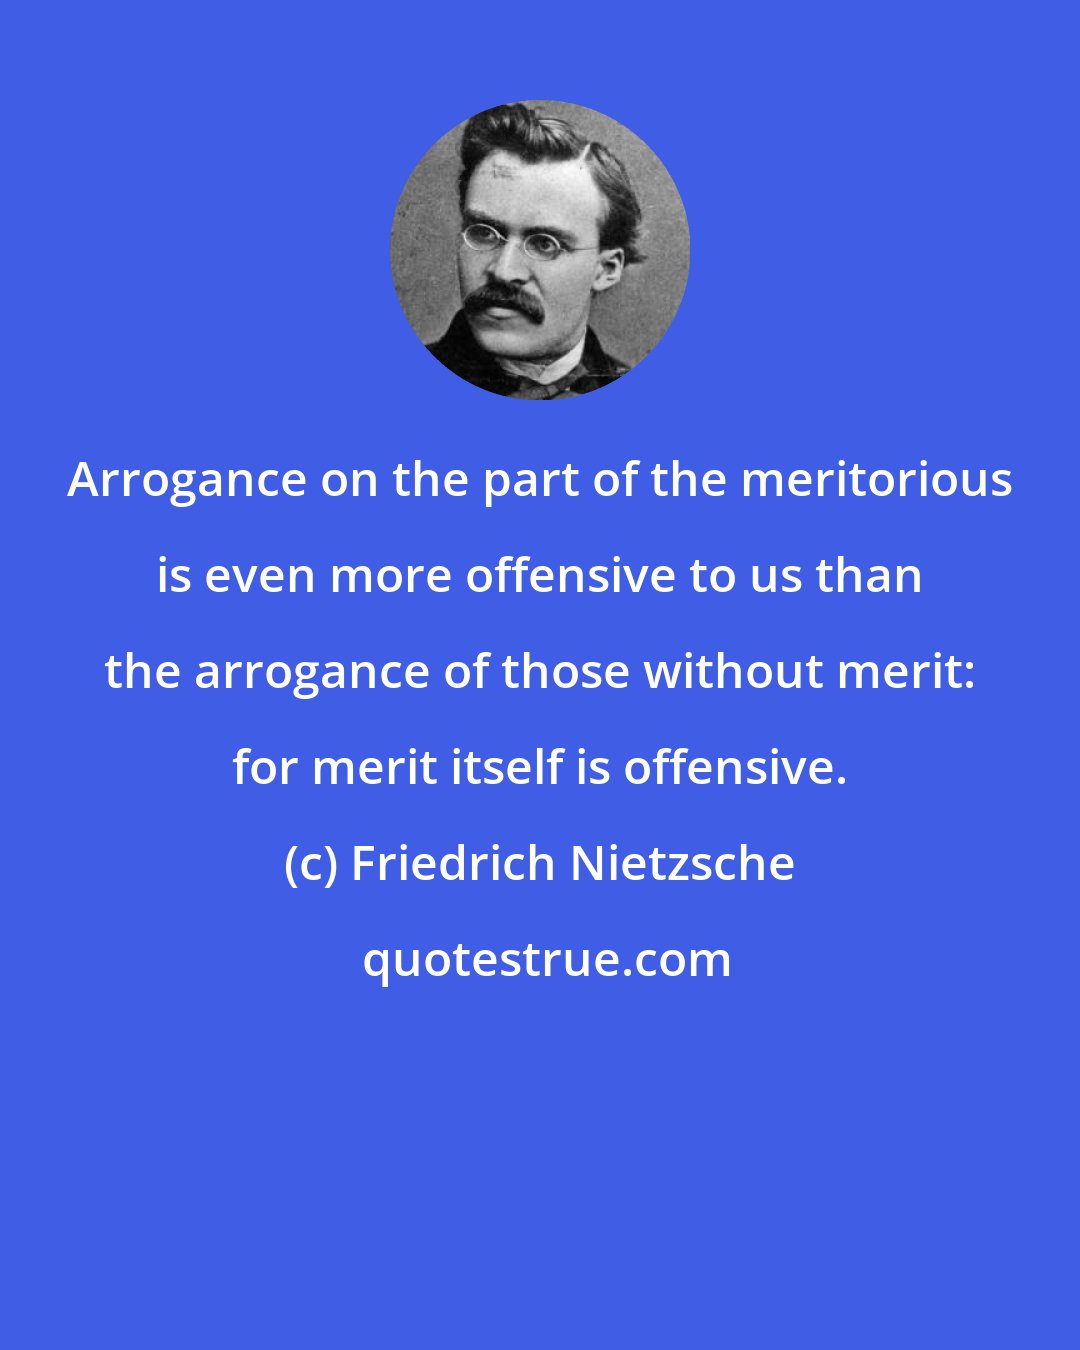 Friedrich Nietzsche: Arrogance on the part of the meritorious is even more offensive to us than the arrogance of those without merit: for merit itself is offensive.